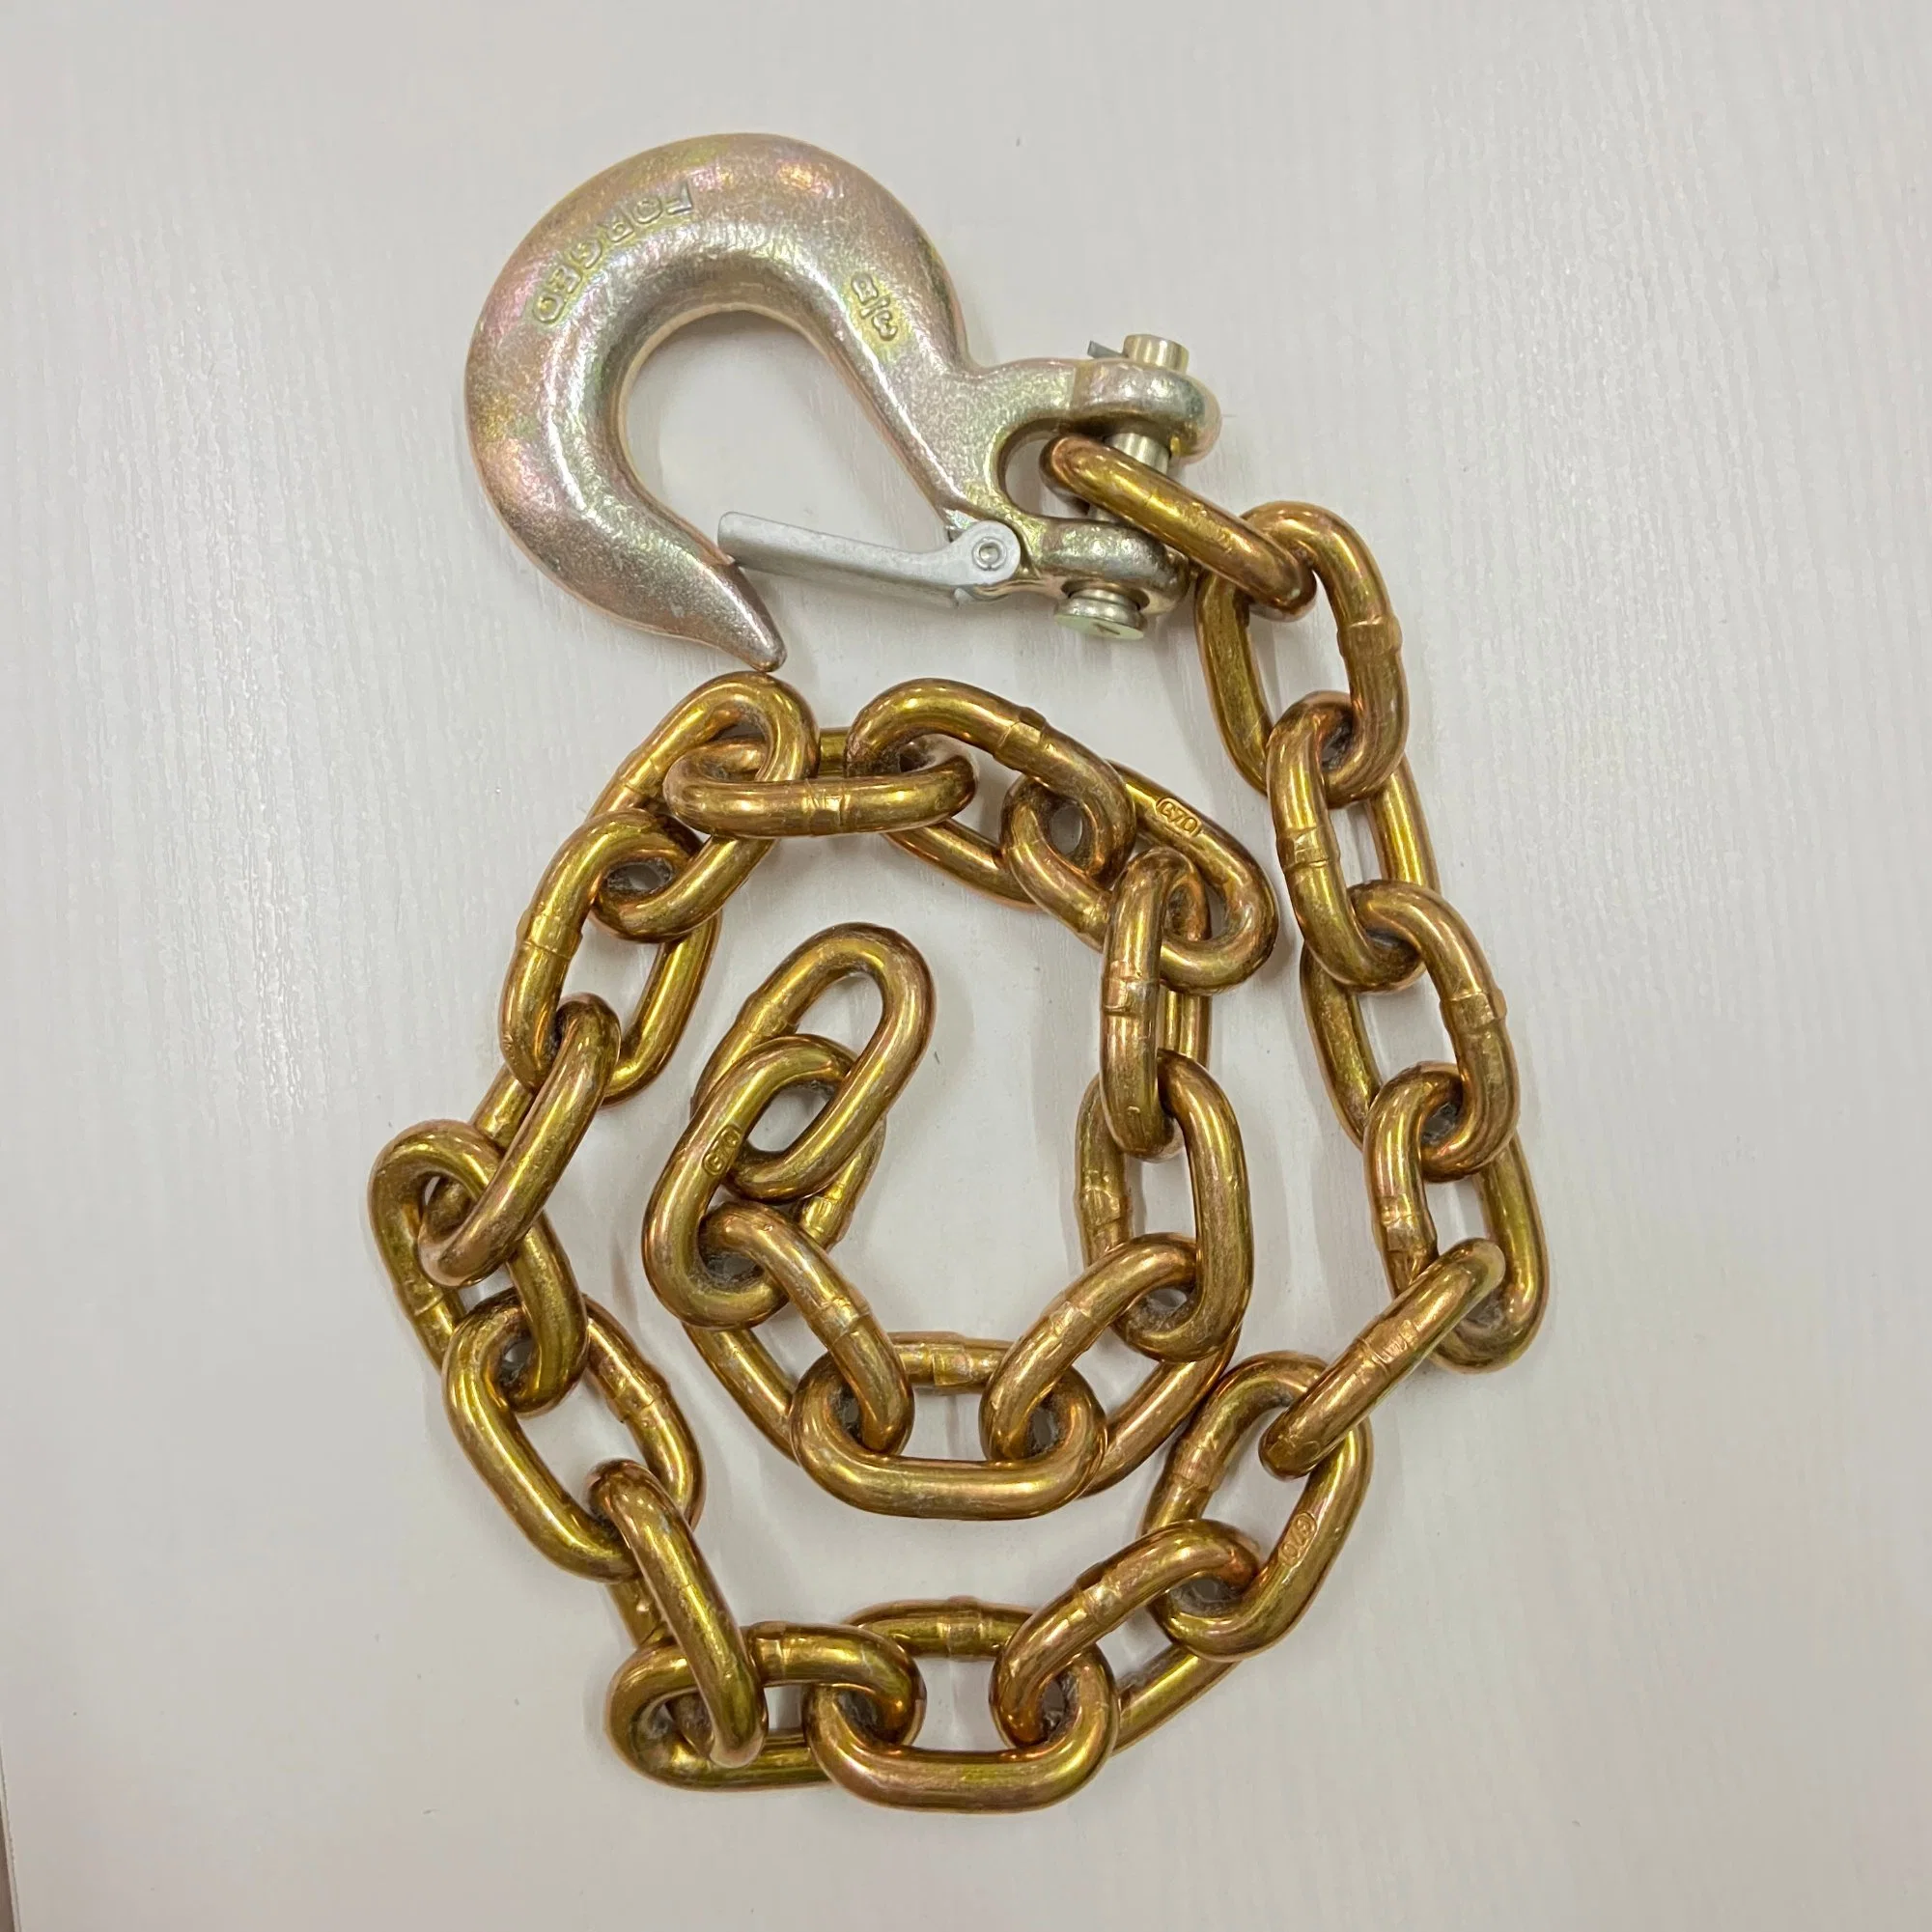 G70 5/16" Trailer Safety Chain with Clevis/Eye Slip Hook with Latch